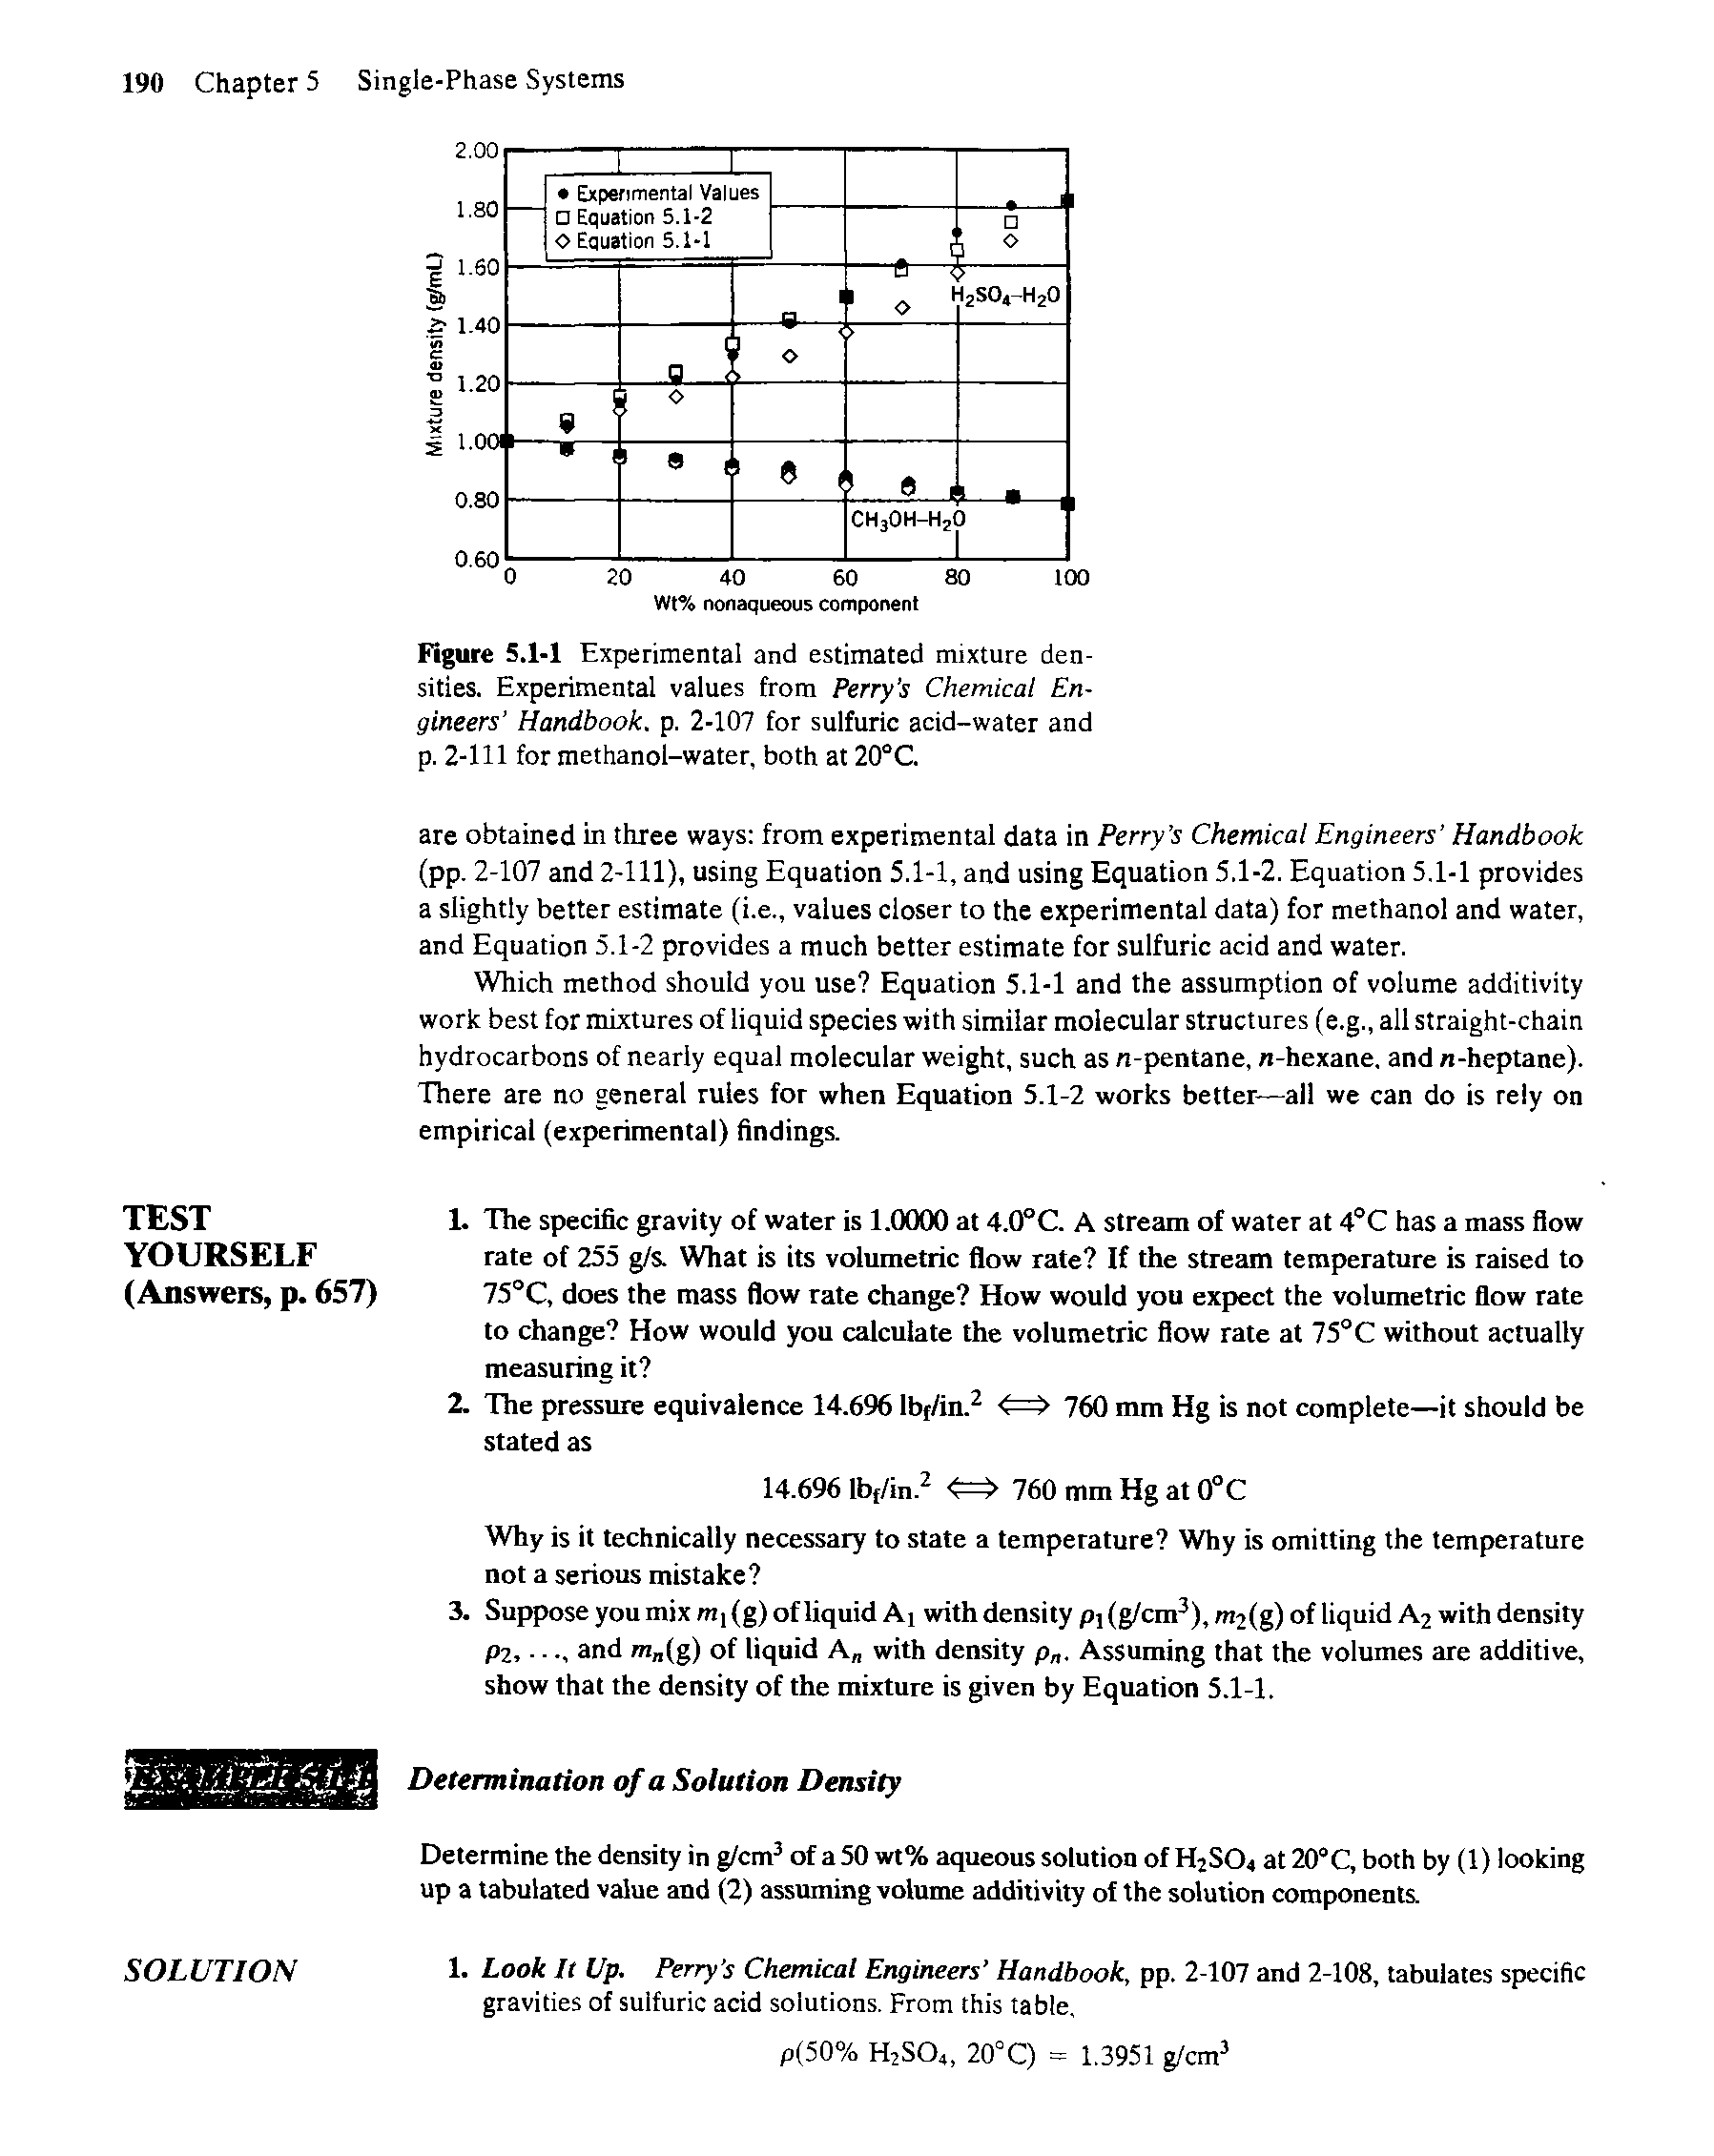 Figure 5.1-1 Experimental and estimated mixture densities. Experimental values from Perry s Chemical Engineers Handbook, p. 2-107 for sulfuric acid-water and p. 2-111 for methanol-water, both at 20°C.